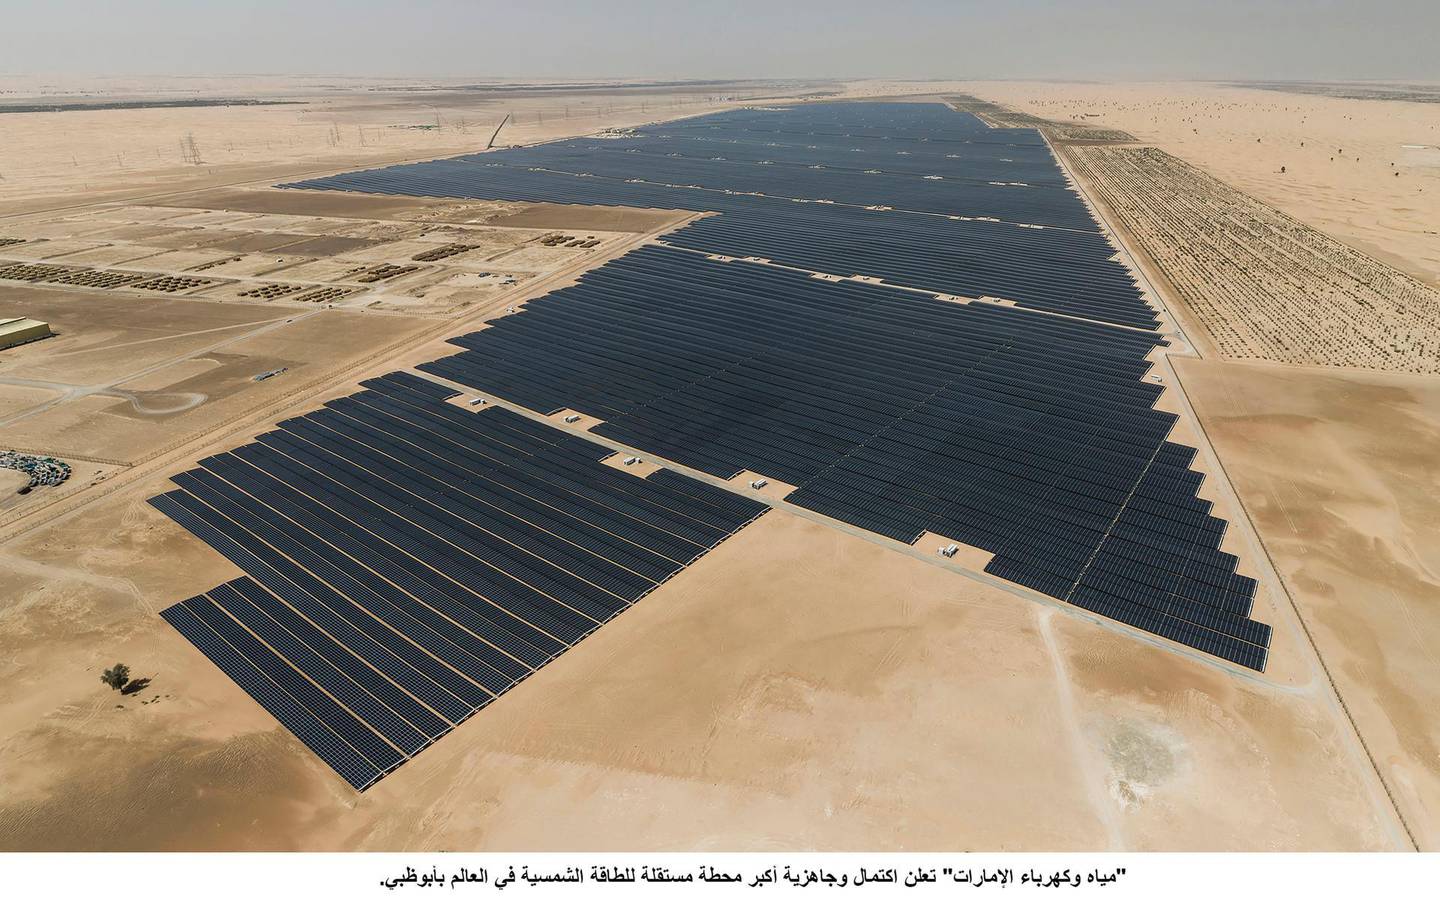 The Emirates Water and Electricity Company is planning to develop a giant two-gigawatt solar farm in Al Dhafra. Wam